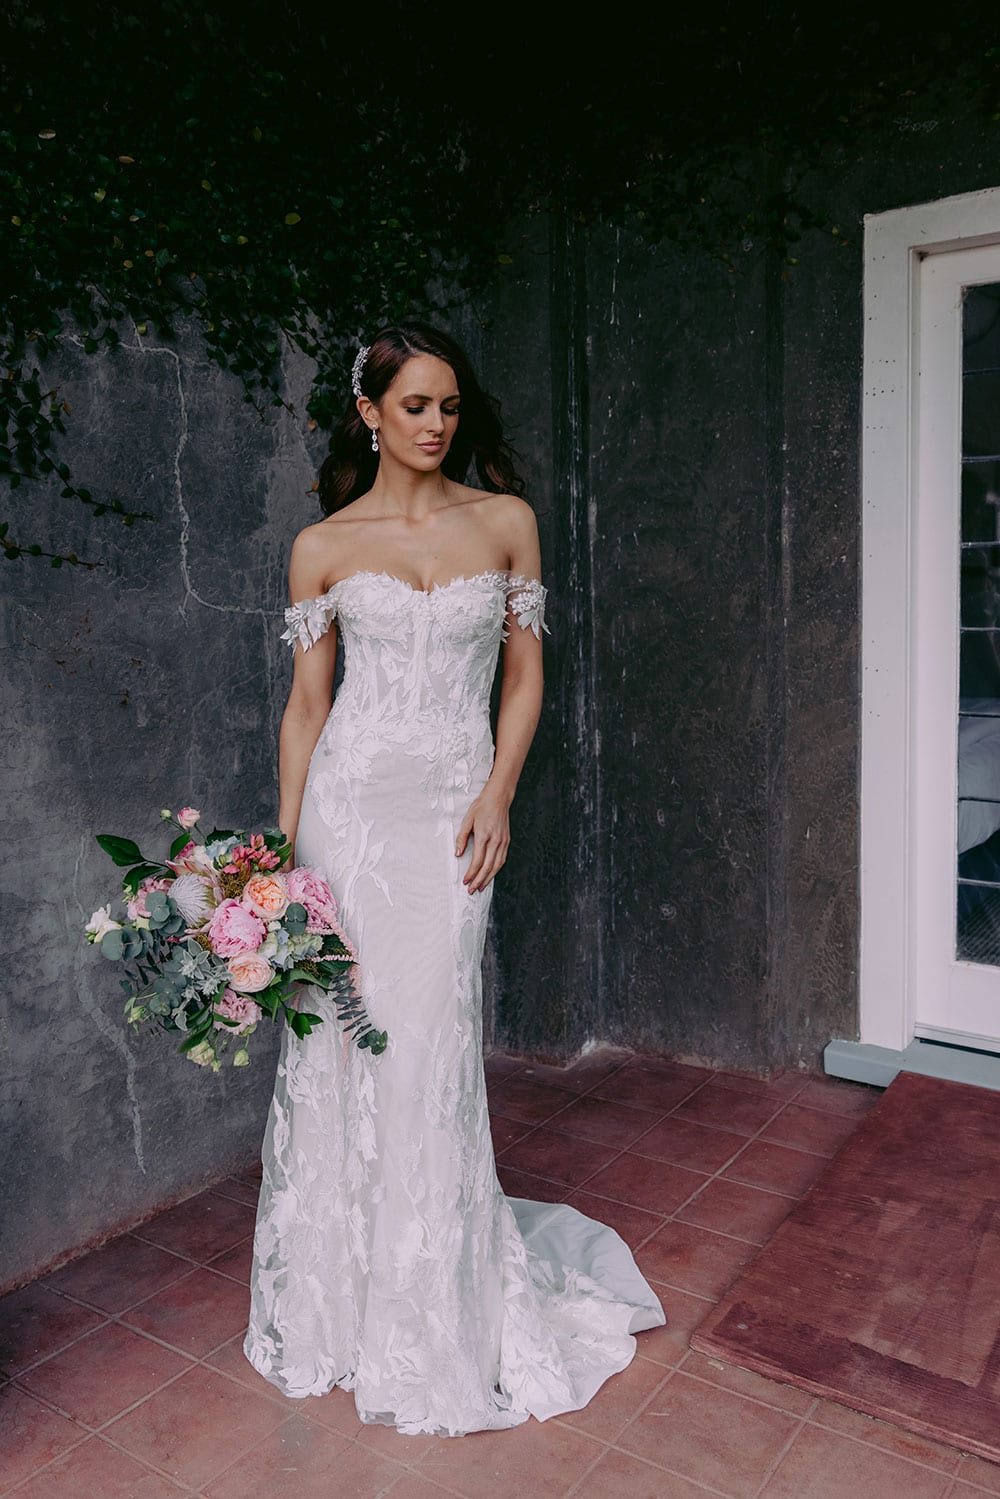 Sachi Wedding gown from Vinka Design - This spectacular wedding dress is off-shoulder and form-fitting to show off your figure to perfection. Richly embroidered lace is highlighted with small three-dimensional leaves and flowers. Model wearing gown showing full length of dress.